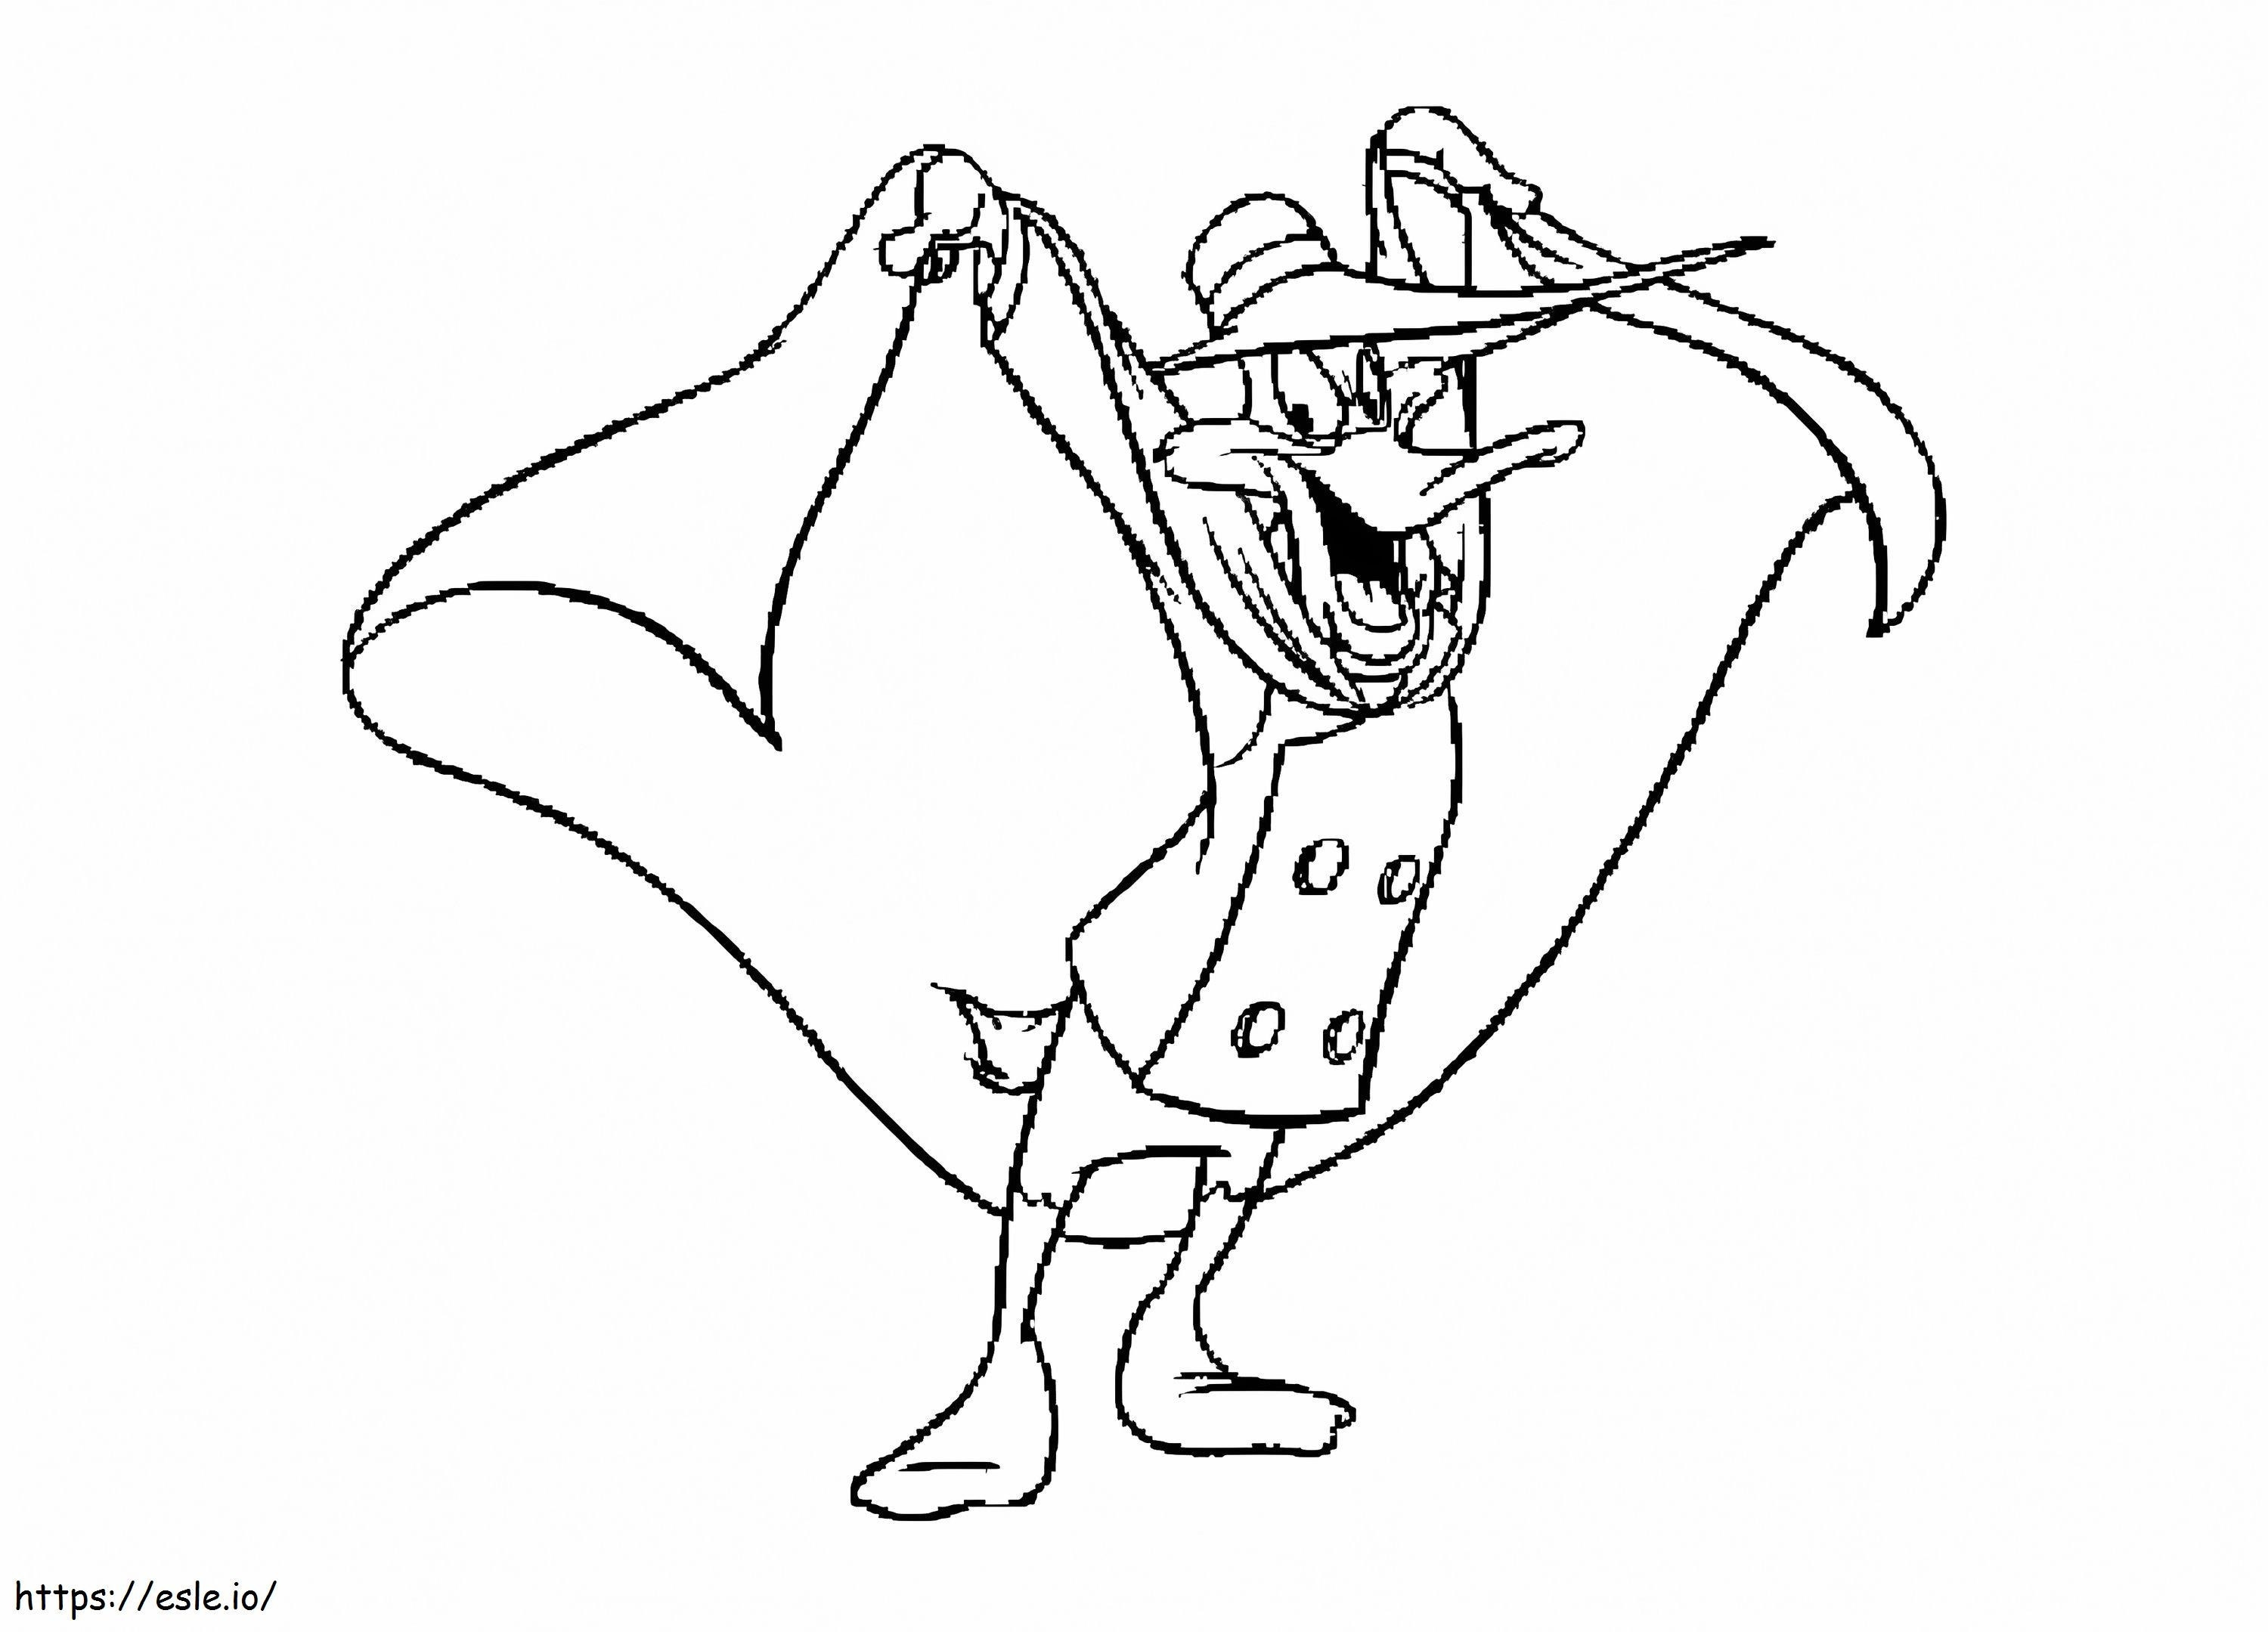 Amazing Darkwing Duck coloring page